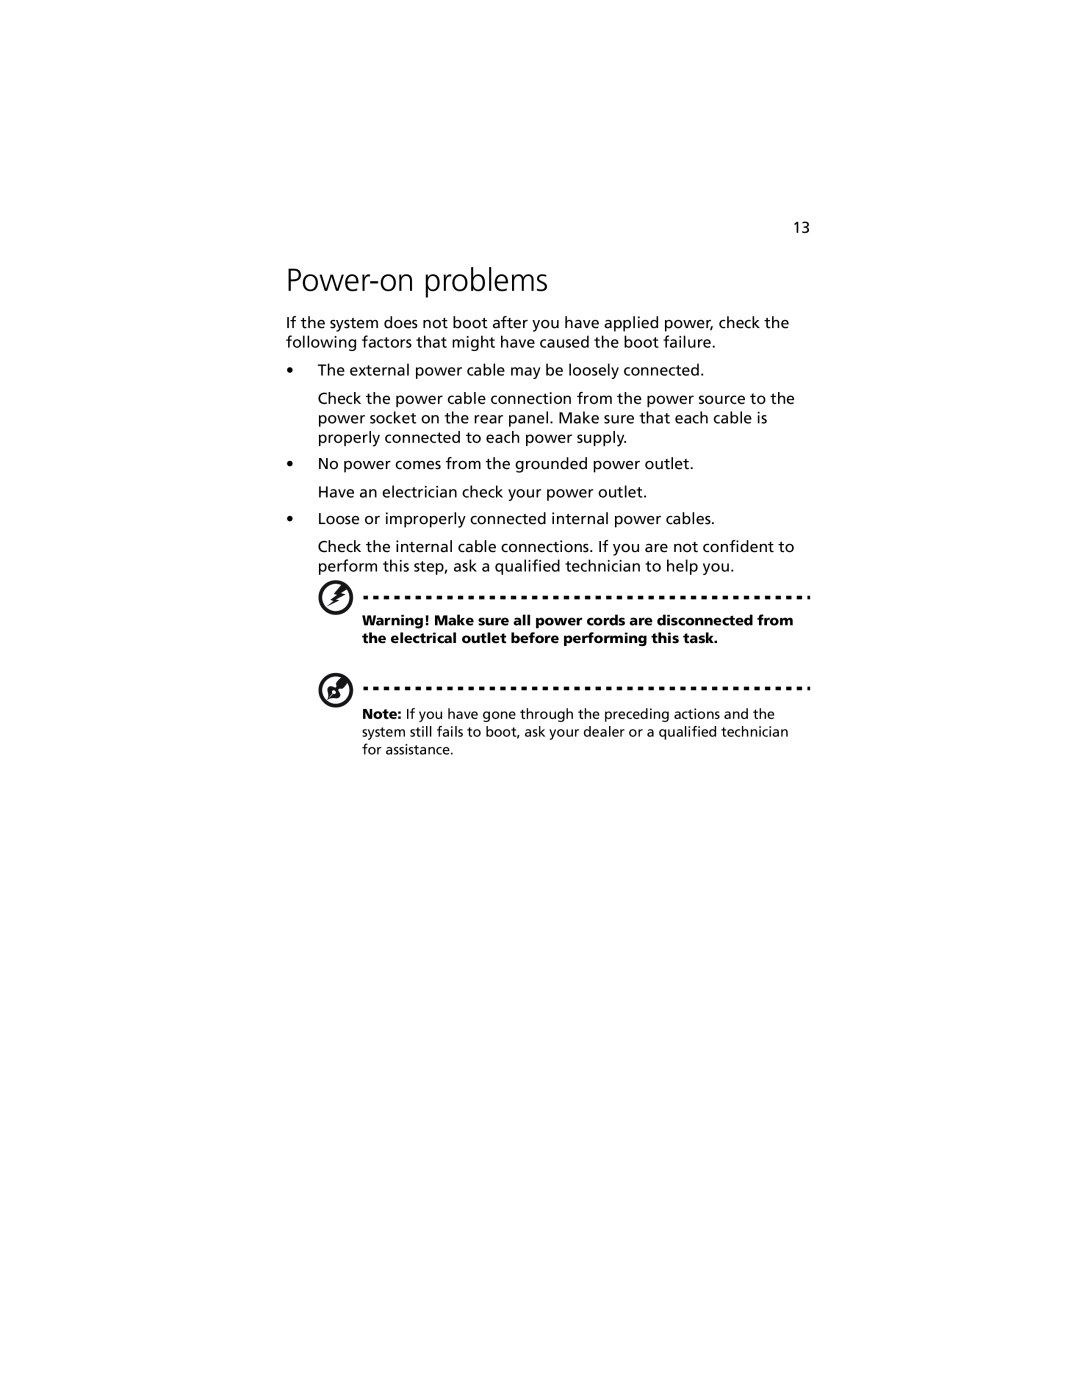 Acer G301 manual Power-on problems 